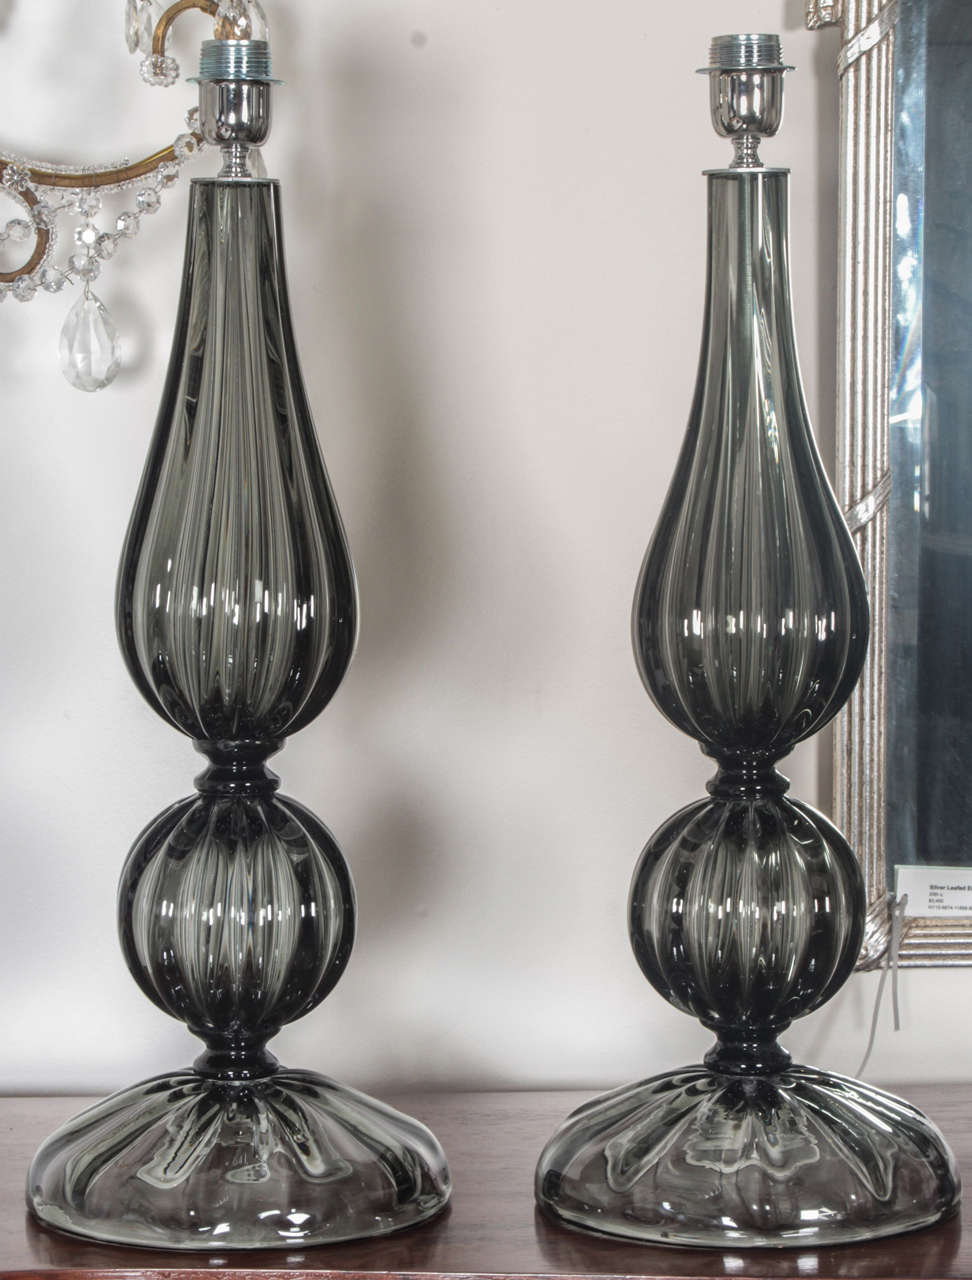 Flawless pair of hand blown Murano glass lamps in a smoked, dark gray 